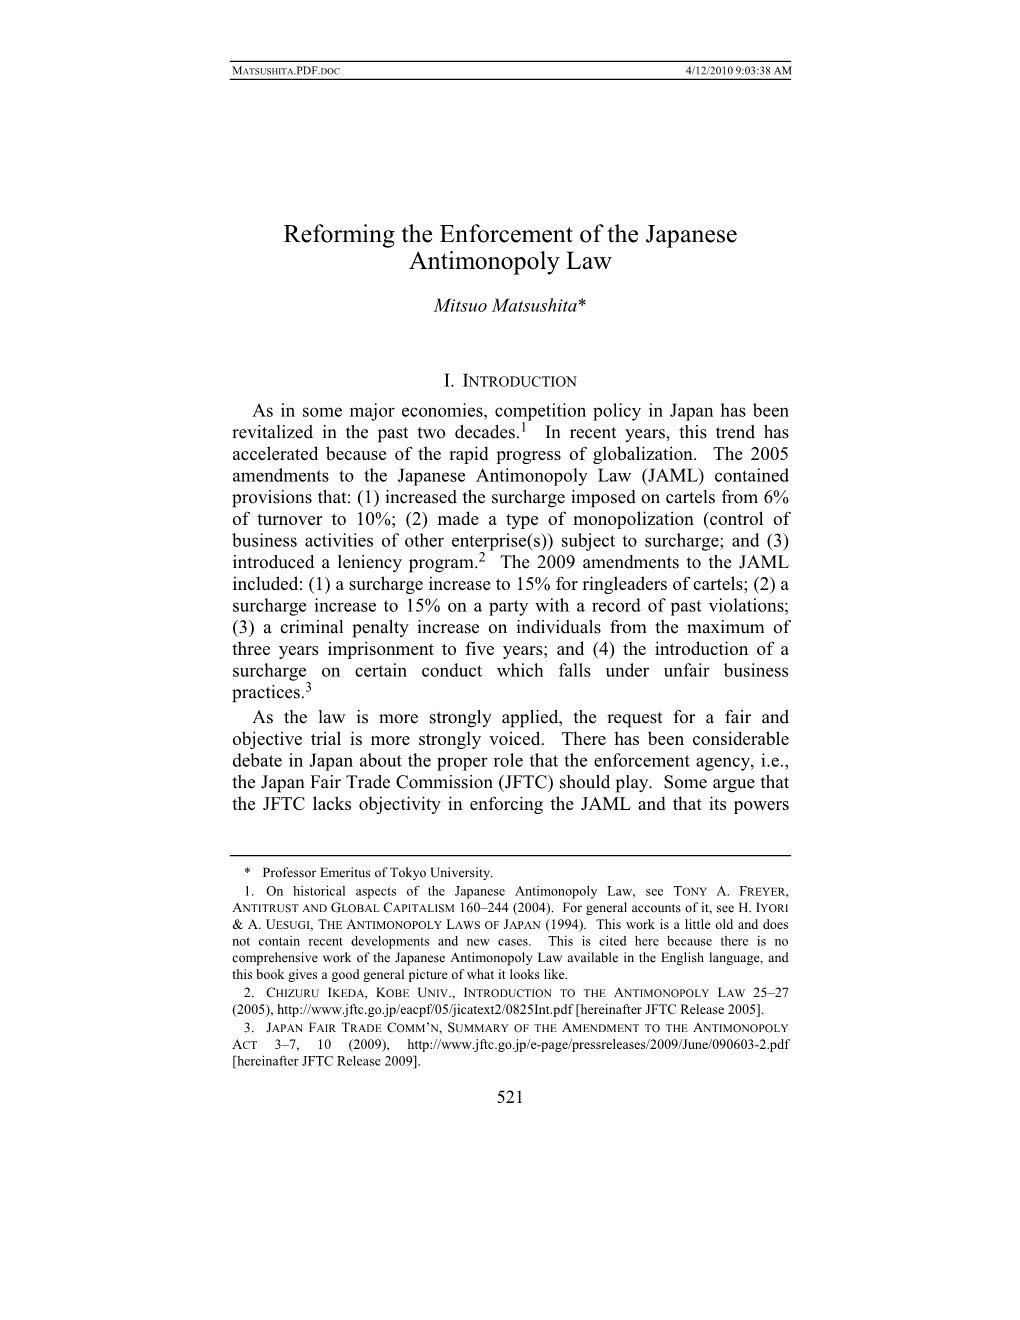 Reforming the Enforcement of the Japanese Antimonopoly Law